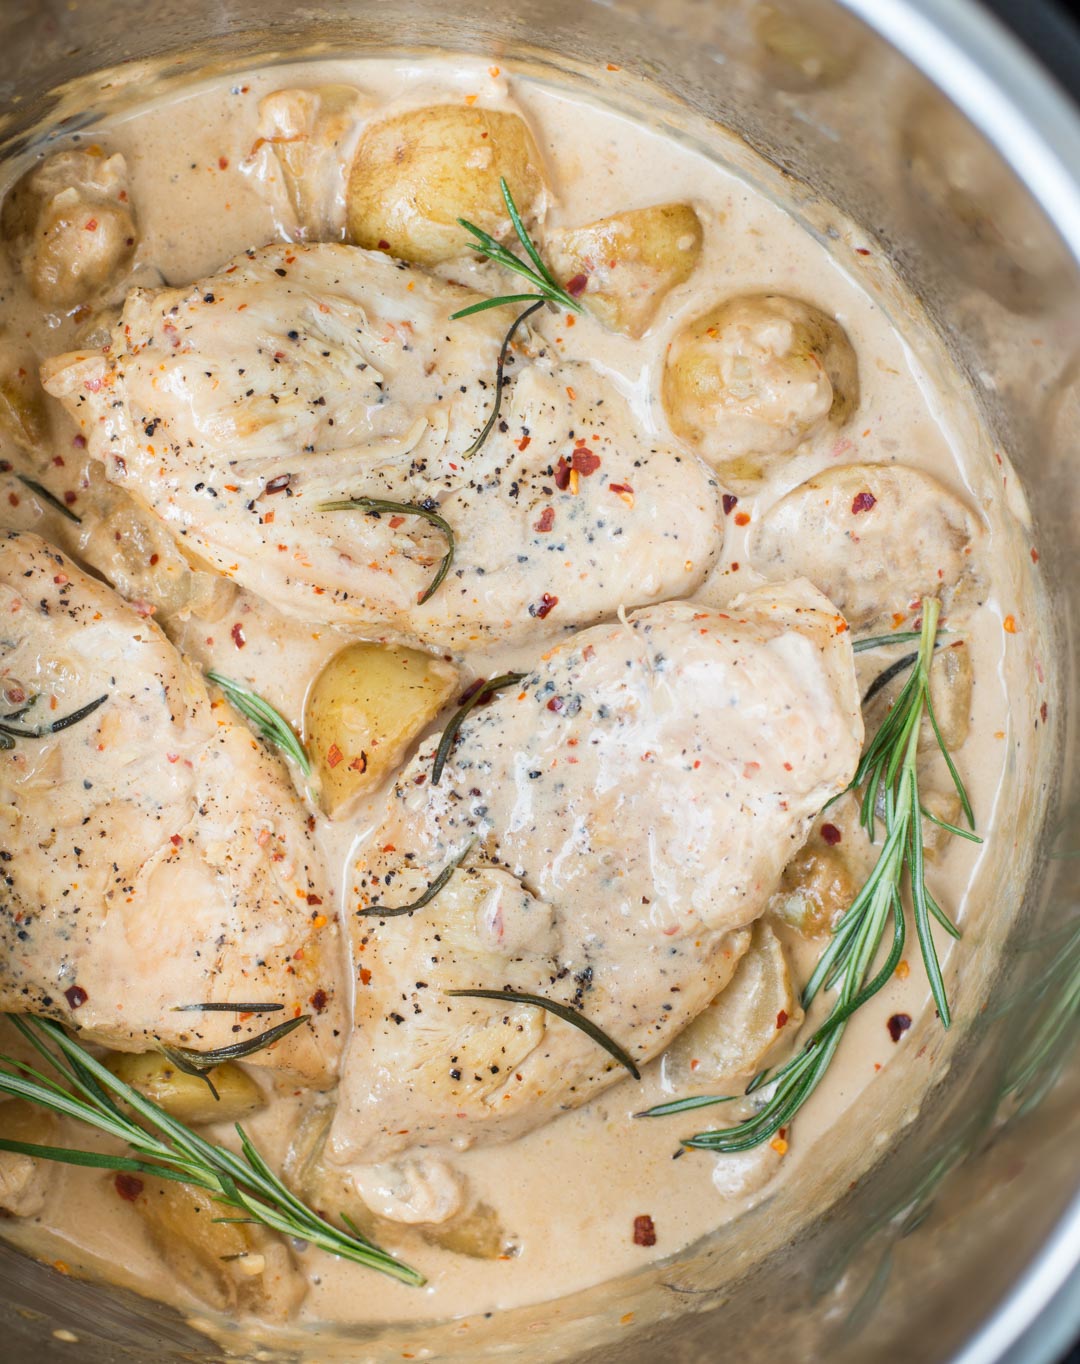 This Instant Pot Creamy Balsamic Chicken and Potatoes with delicious rich Cream Sauce takes only 15 minutes to make. With amazing Balsamic cream sauce, this Instant Pot Chicken with Potatoes is a family friendly dinner.